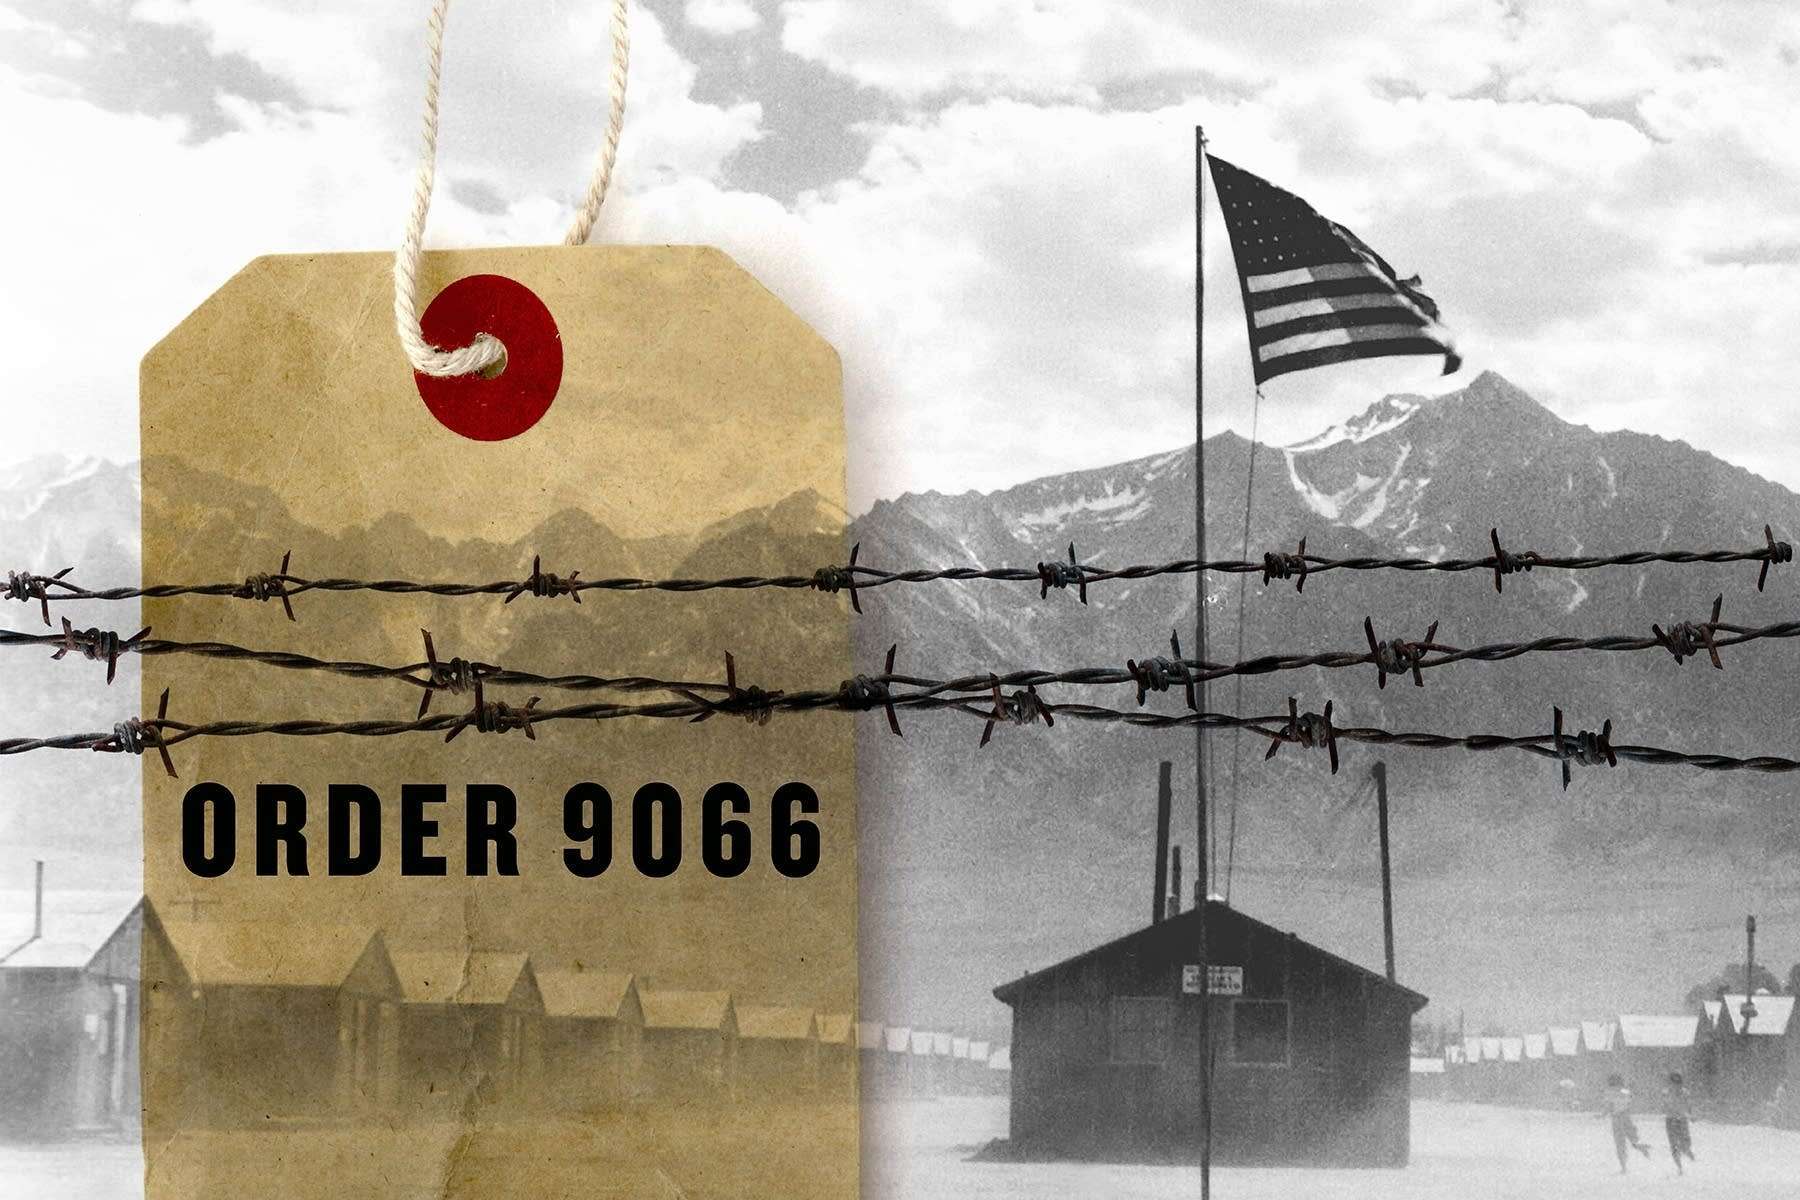 image for Order 9066: An executive order that imprisoned over a 100,000 people of Japanese descent after Pearl Harbour was bombed. This is the first-hand account of those who lived through its enforcement.